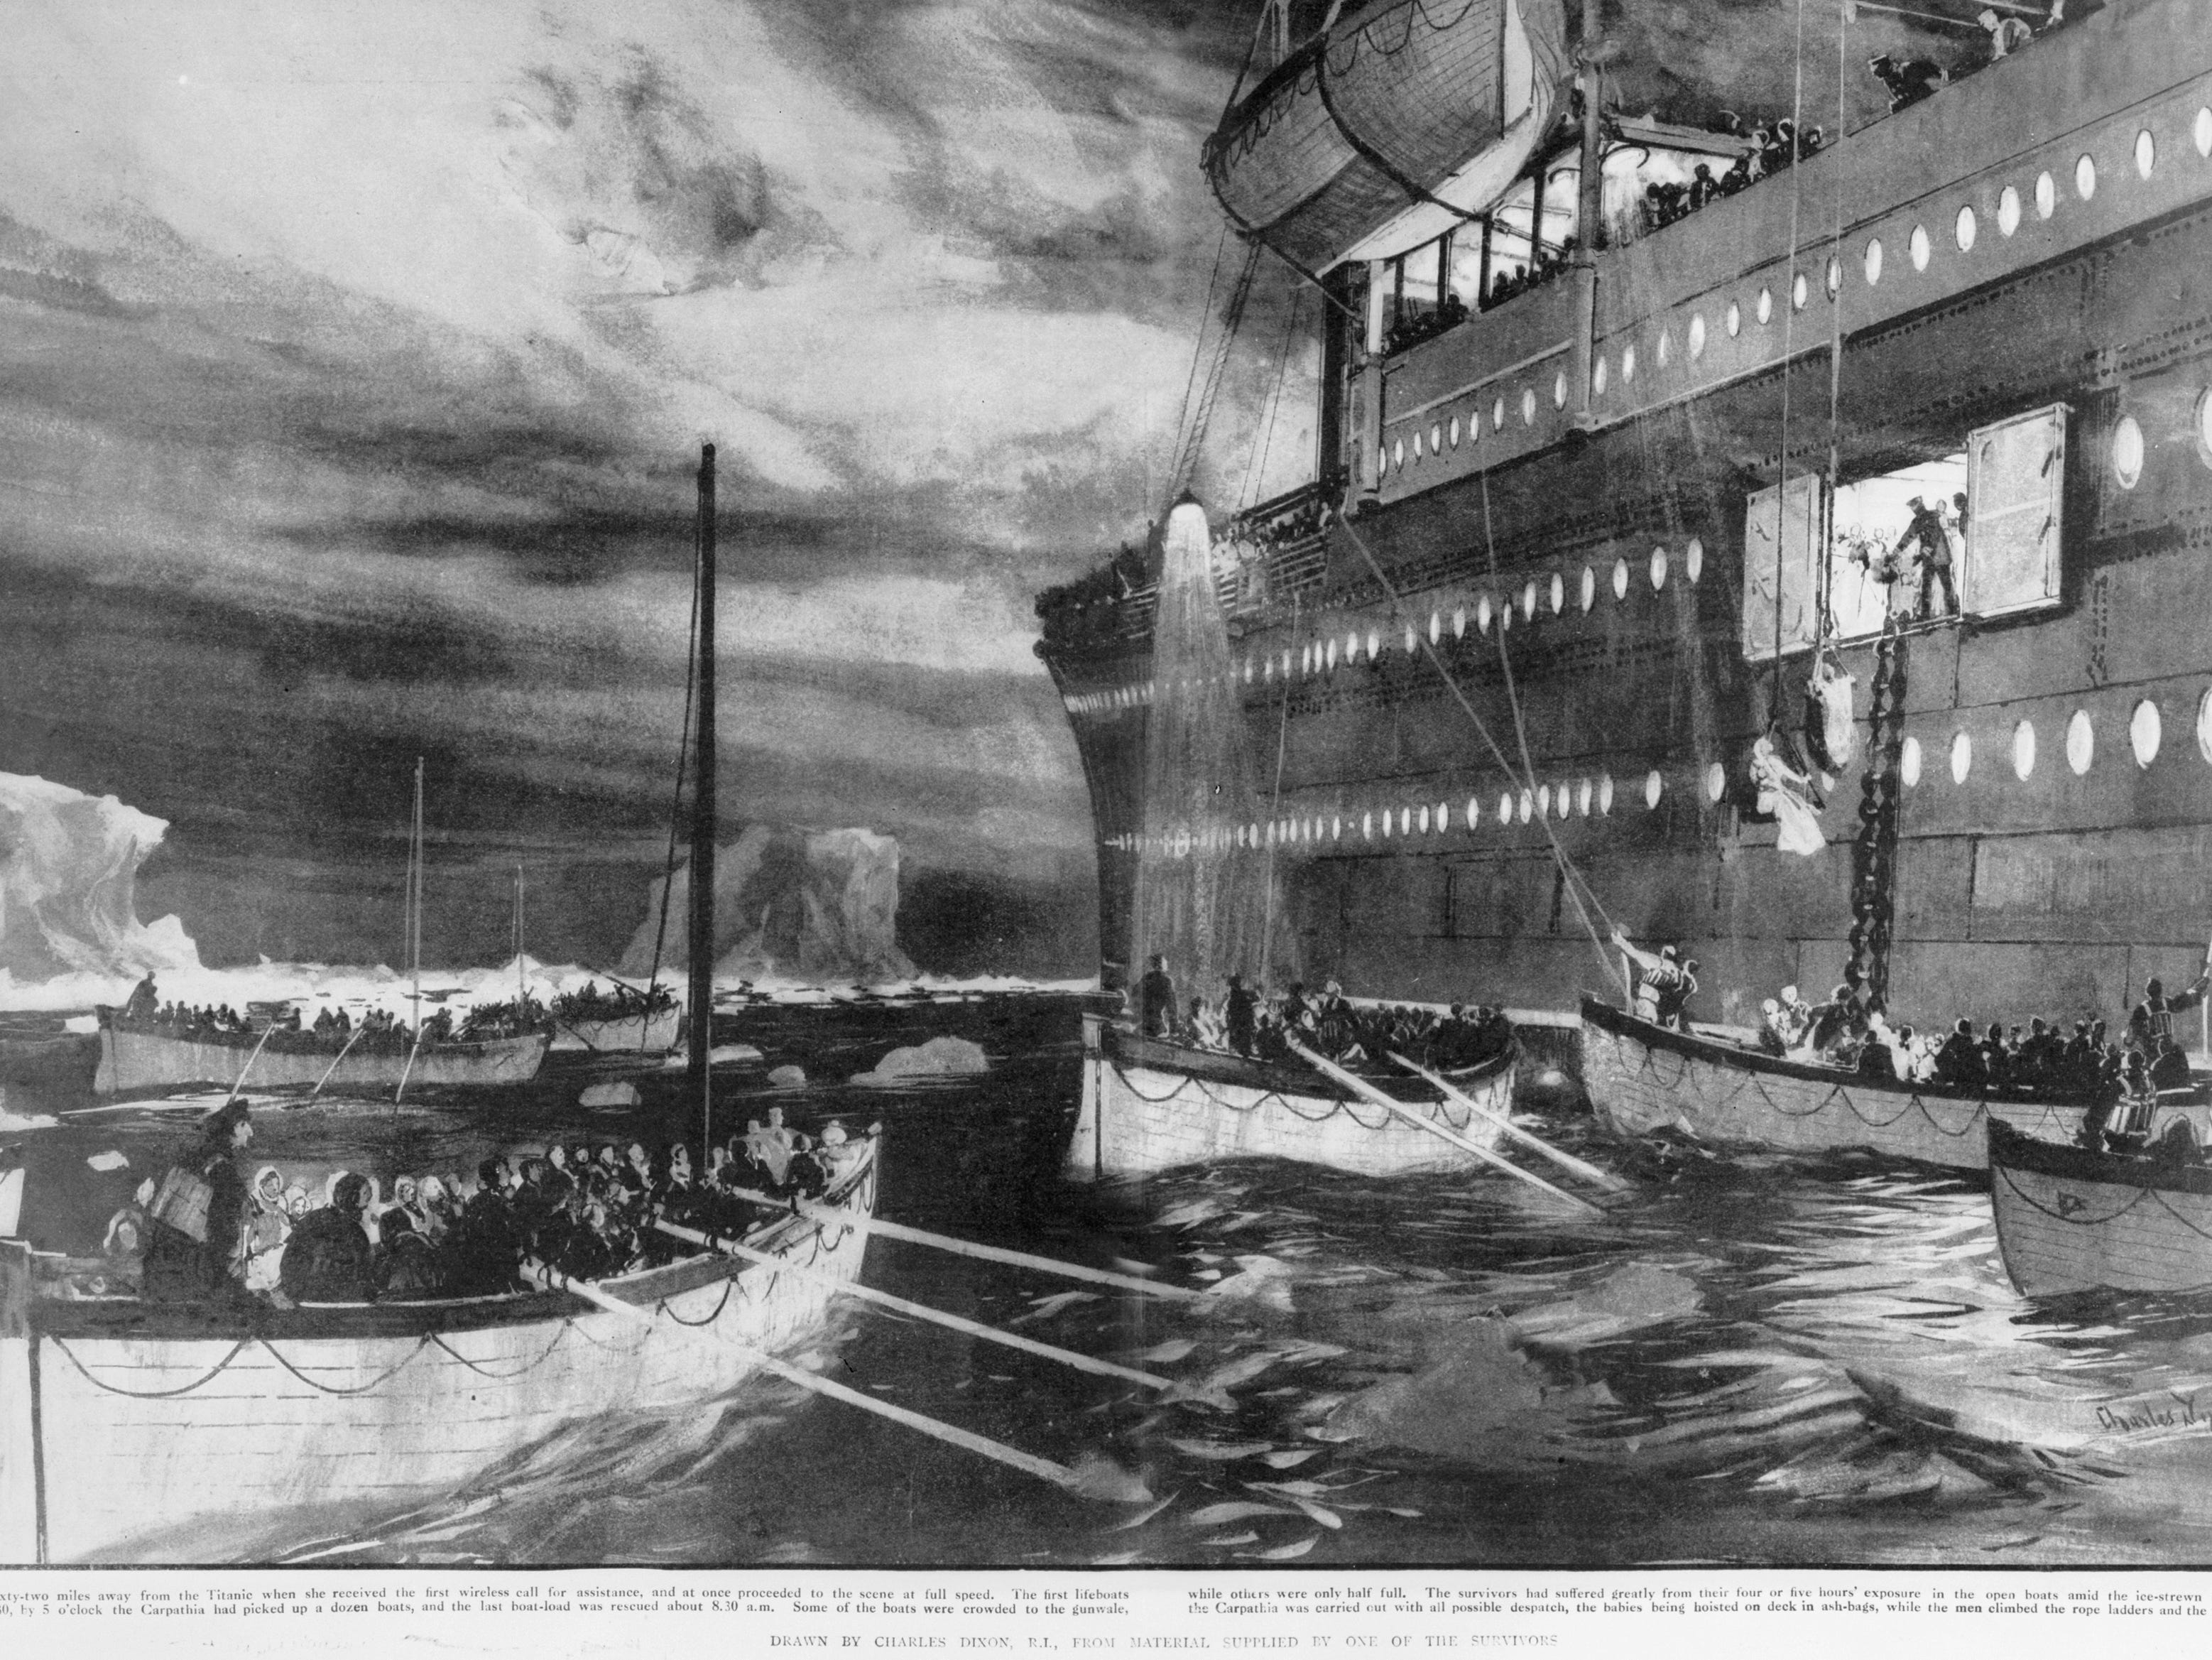 <p>Lifeboat No. 2 was the first to reach and <a href="https://www.britannica.com/topic/Titanic">board the Carpathia</a>. It would take several hours for the ship to pick up all of the survivors. </p>